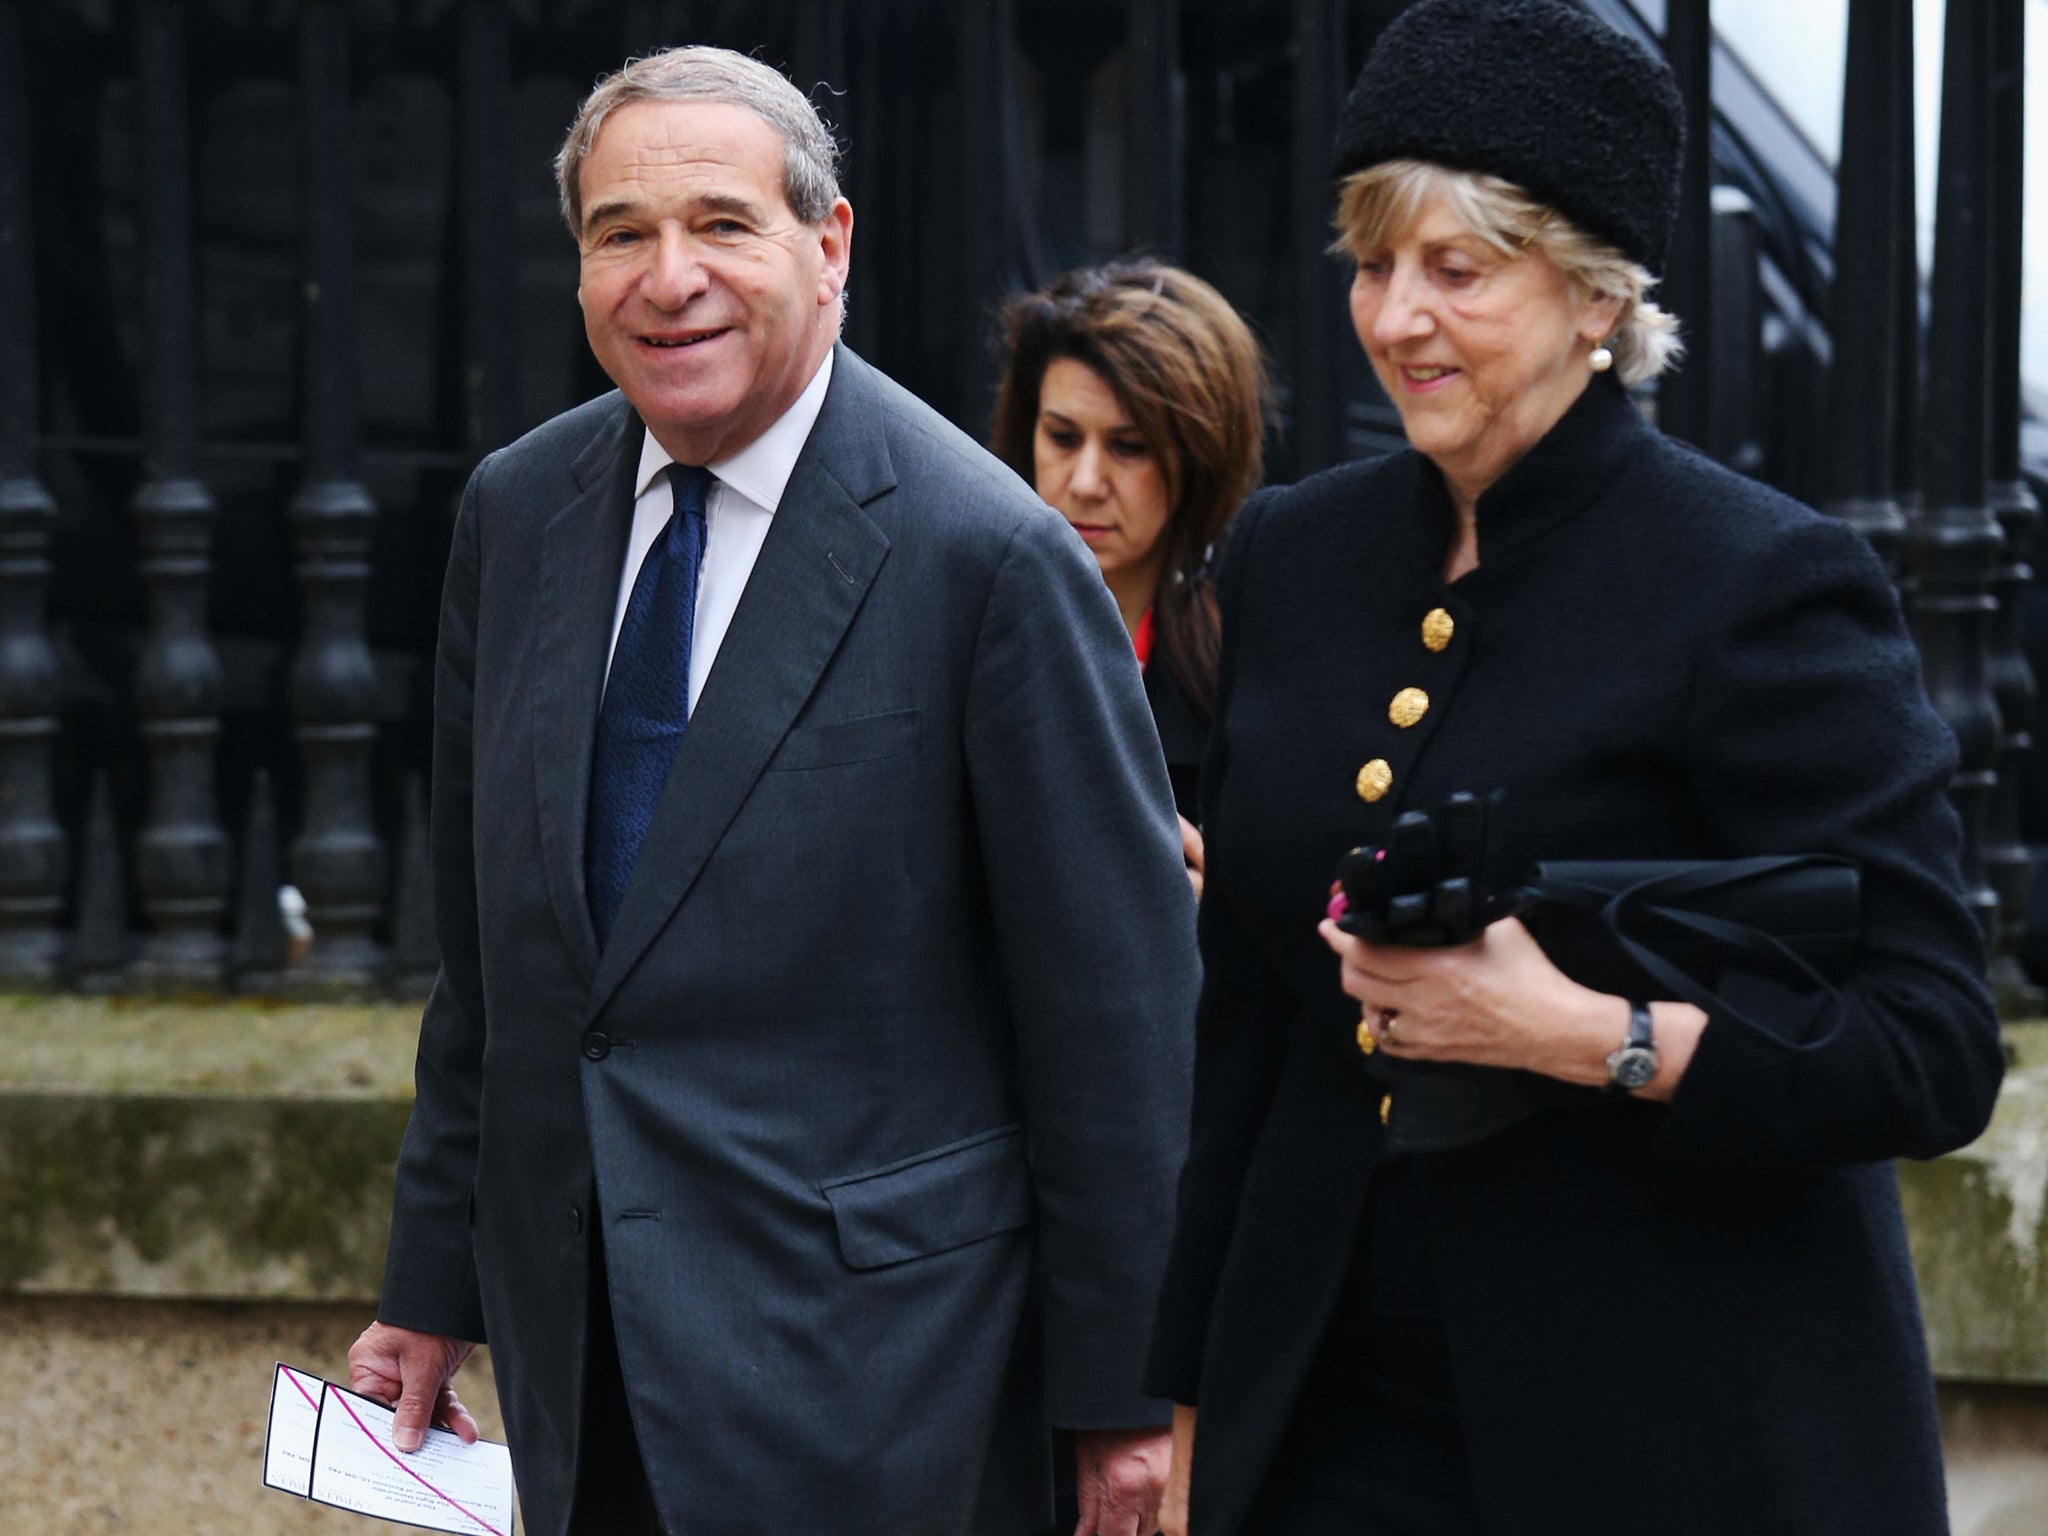 Leon Brittan arrives wife Diana for the funeral service of Baroness Thatcher